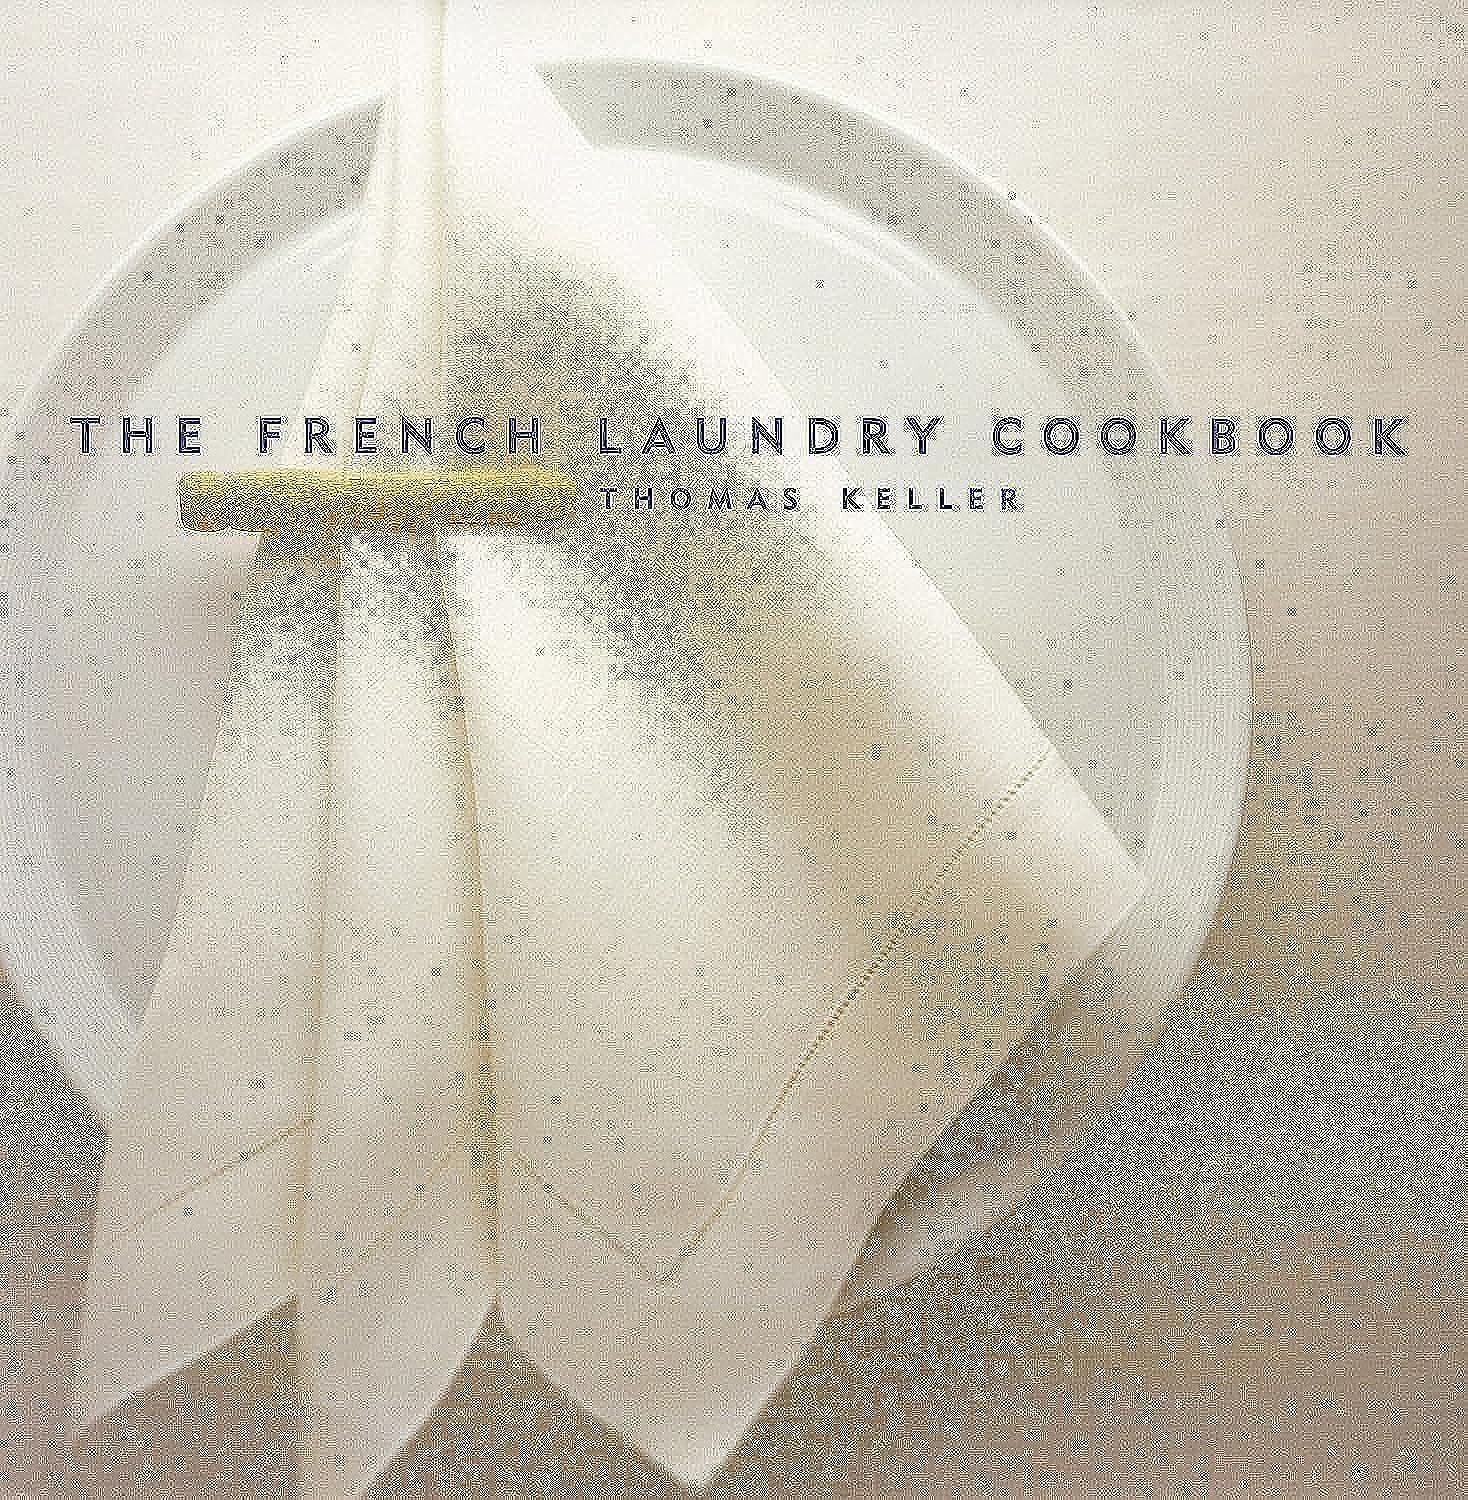 The French Laundry Cookbook by Thomas Keller